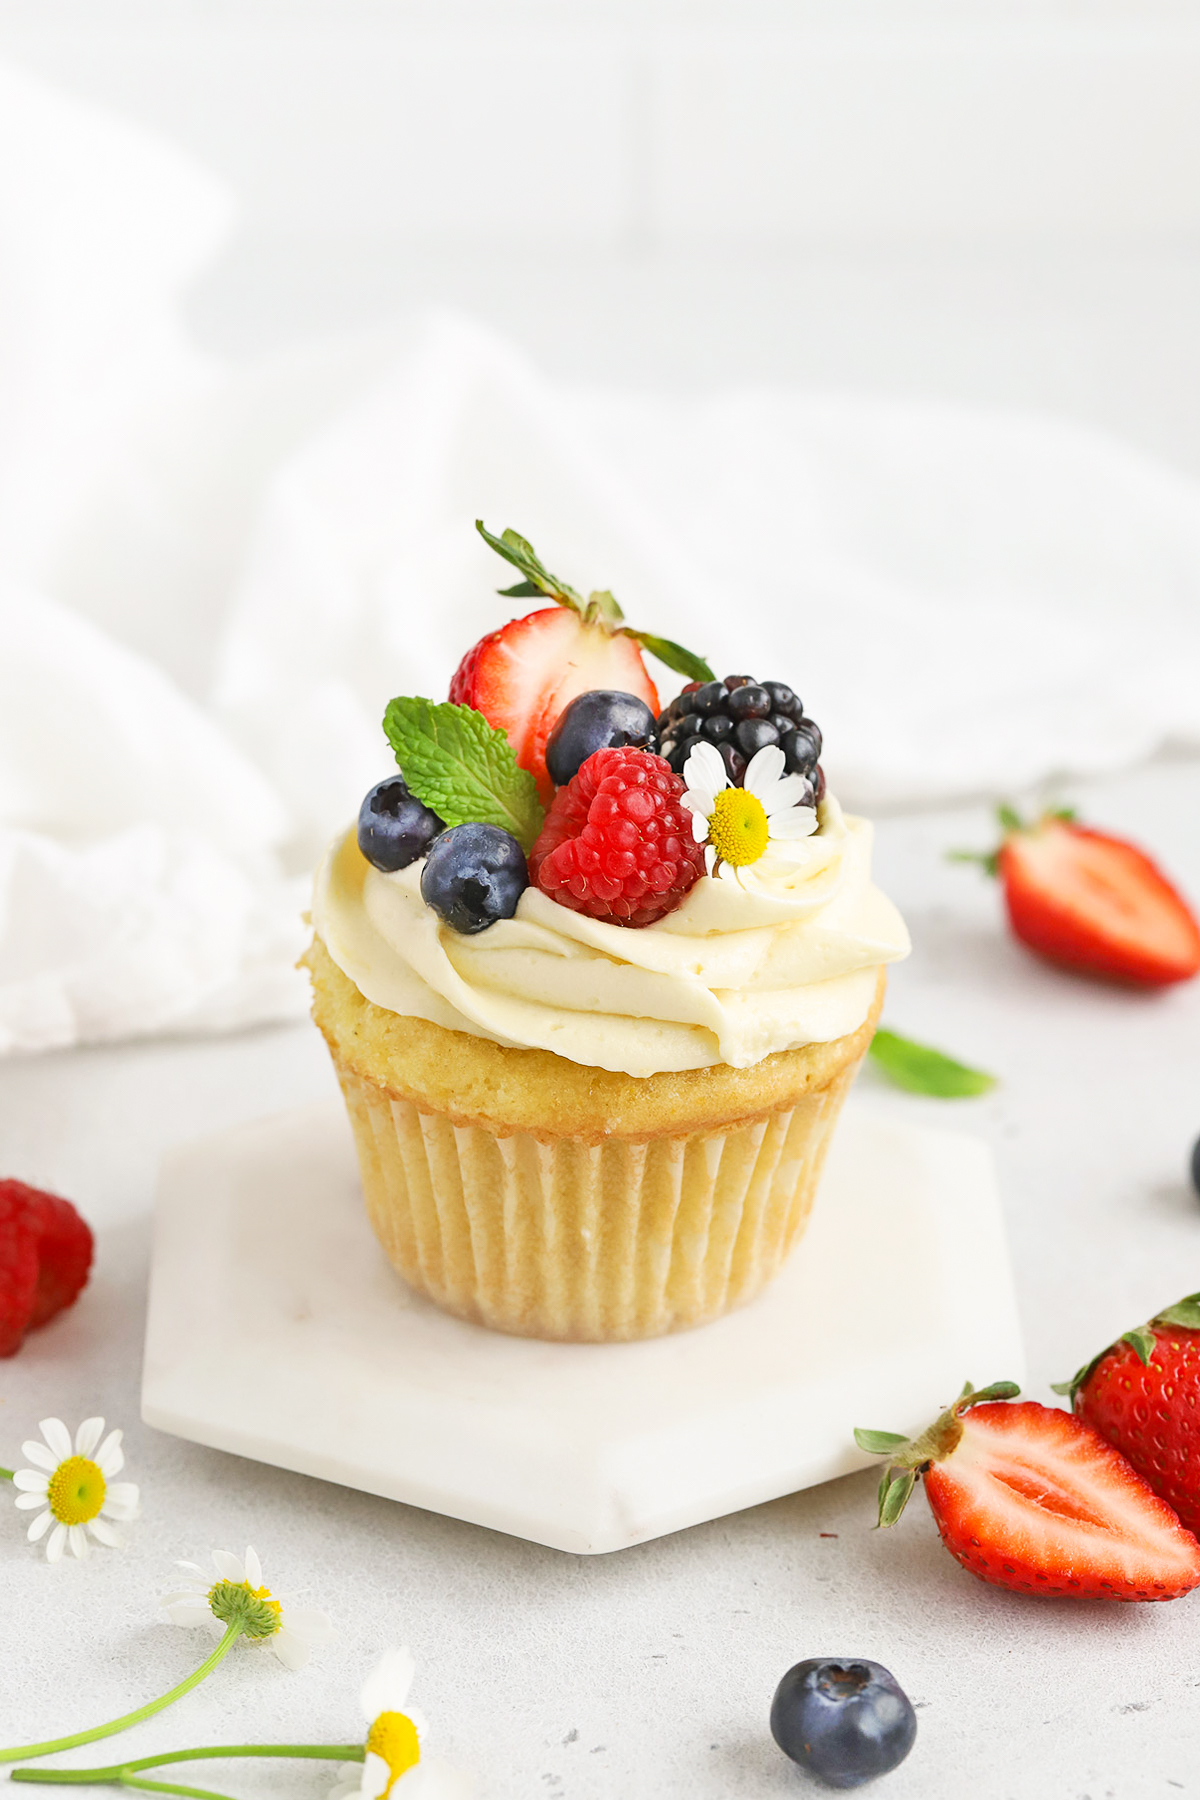 Front view of a gluten-free lemon cupcake with lemon frosting, fresh berries, and edible flowers on a white background